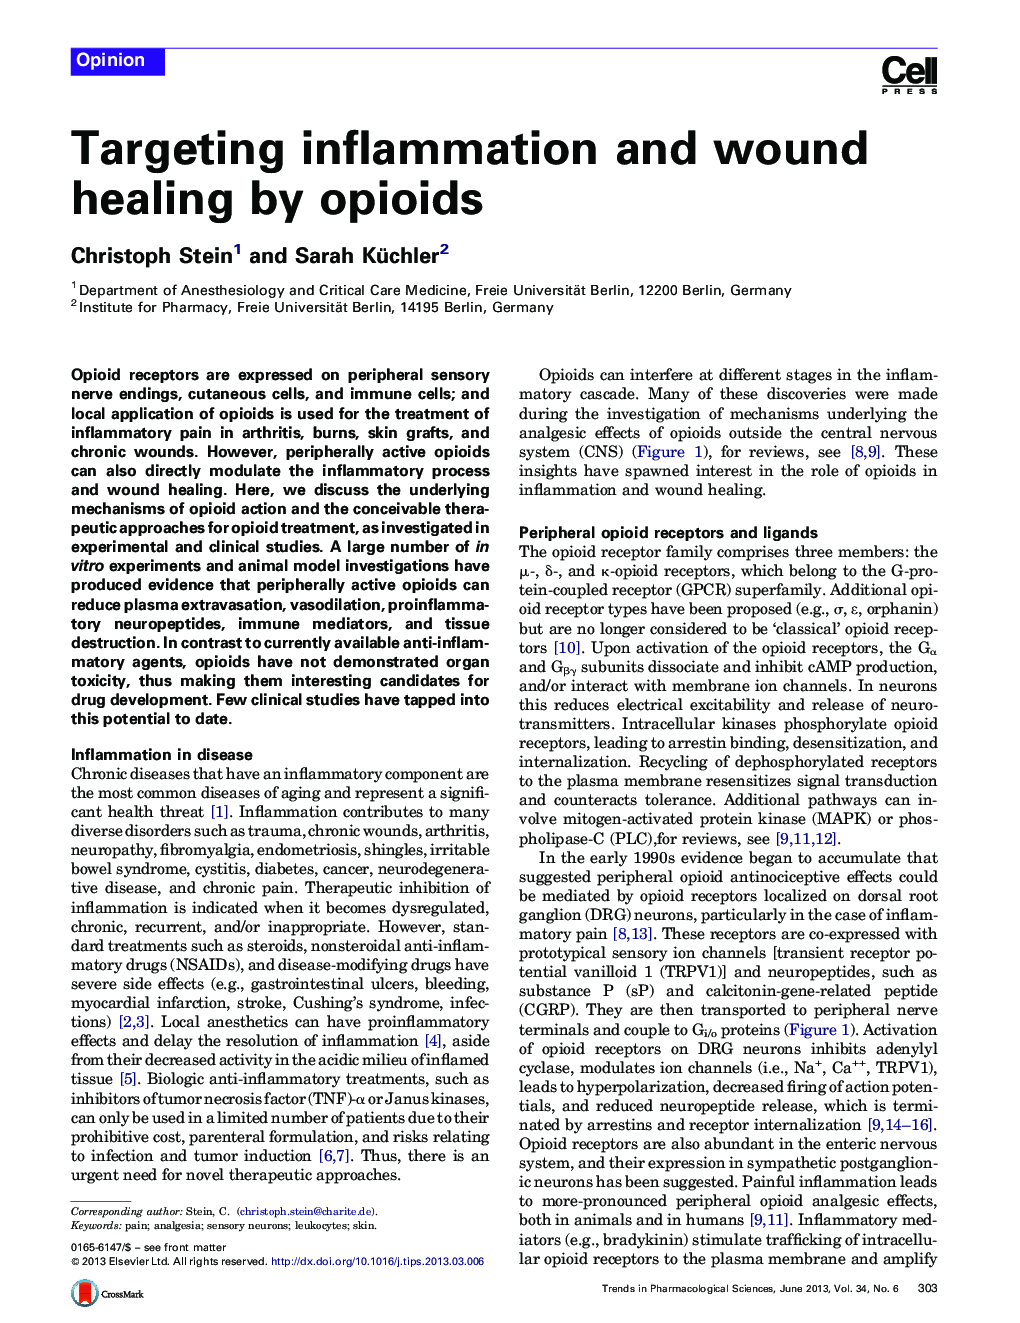 Targeting inflammation and wound healing by opioids